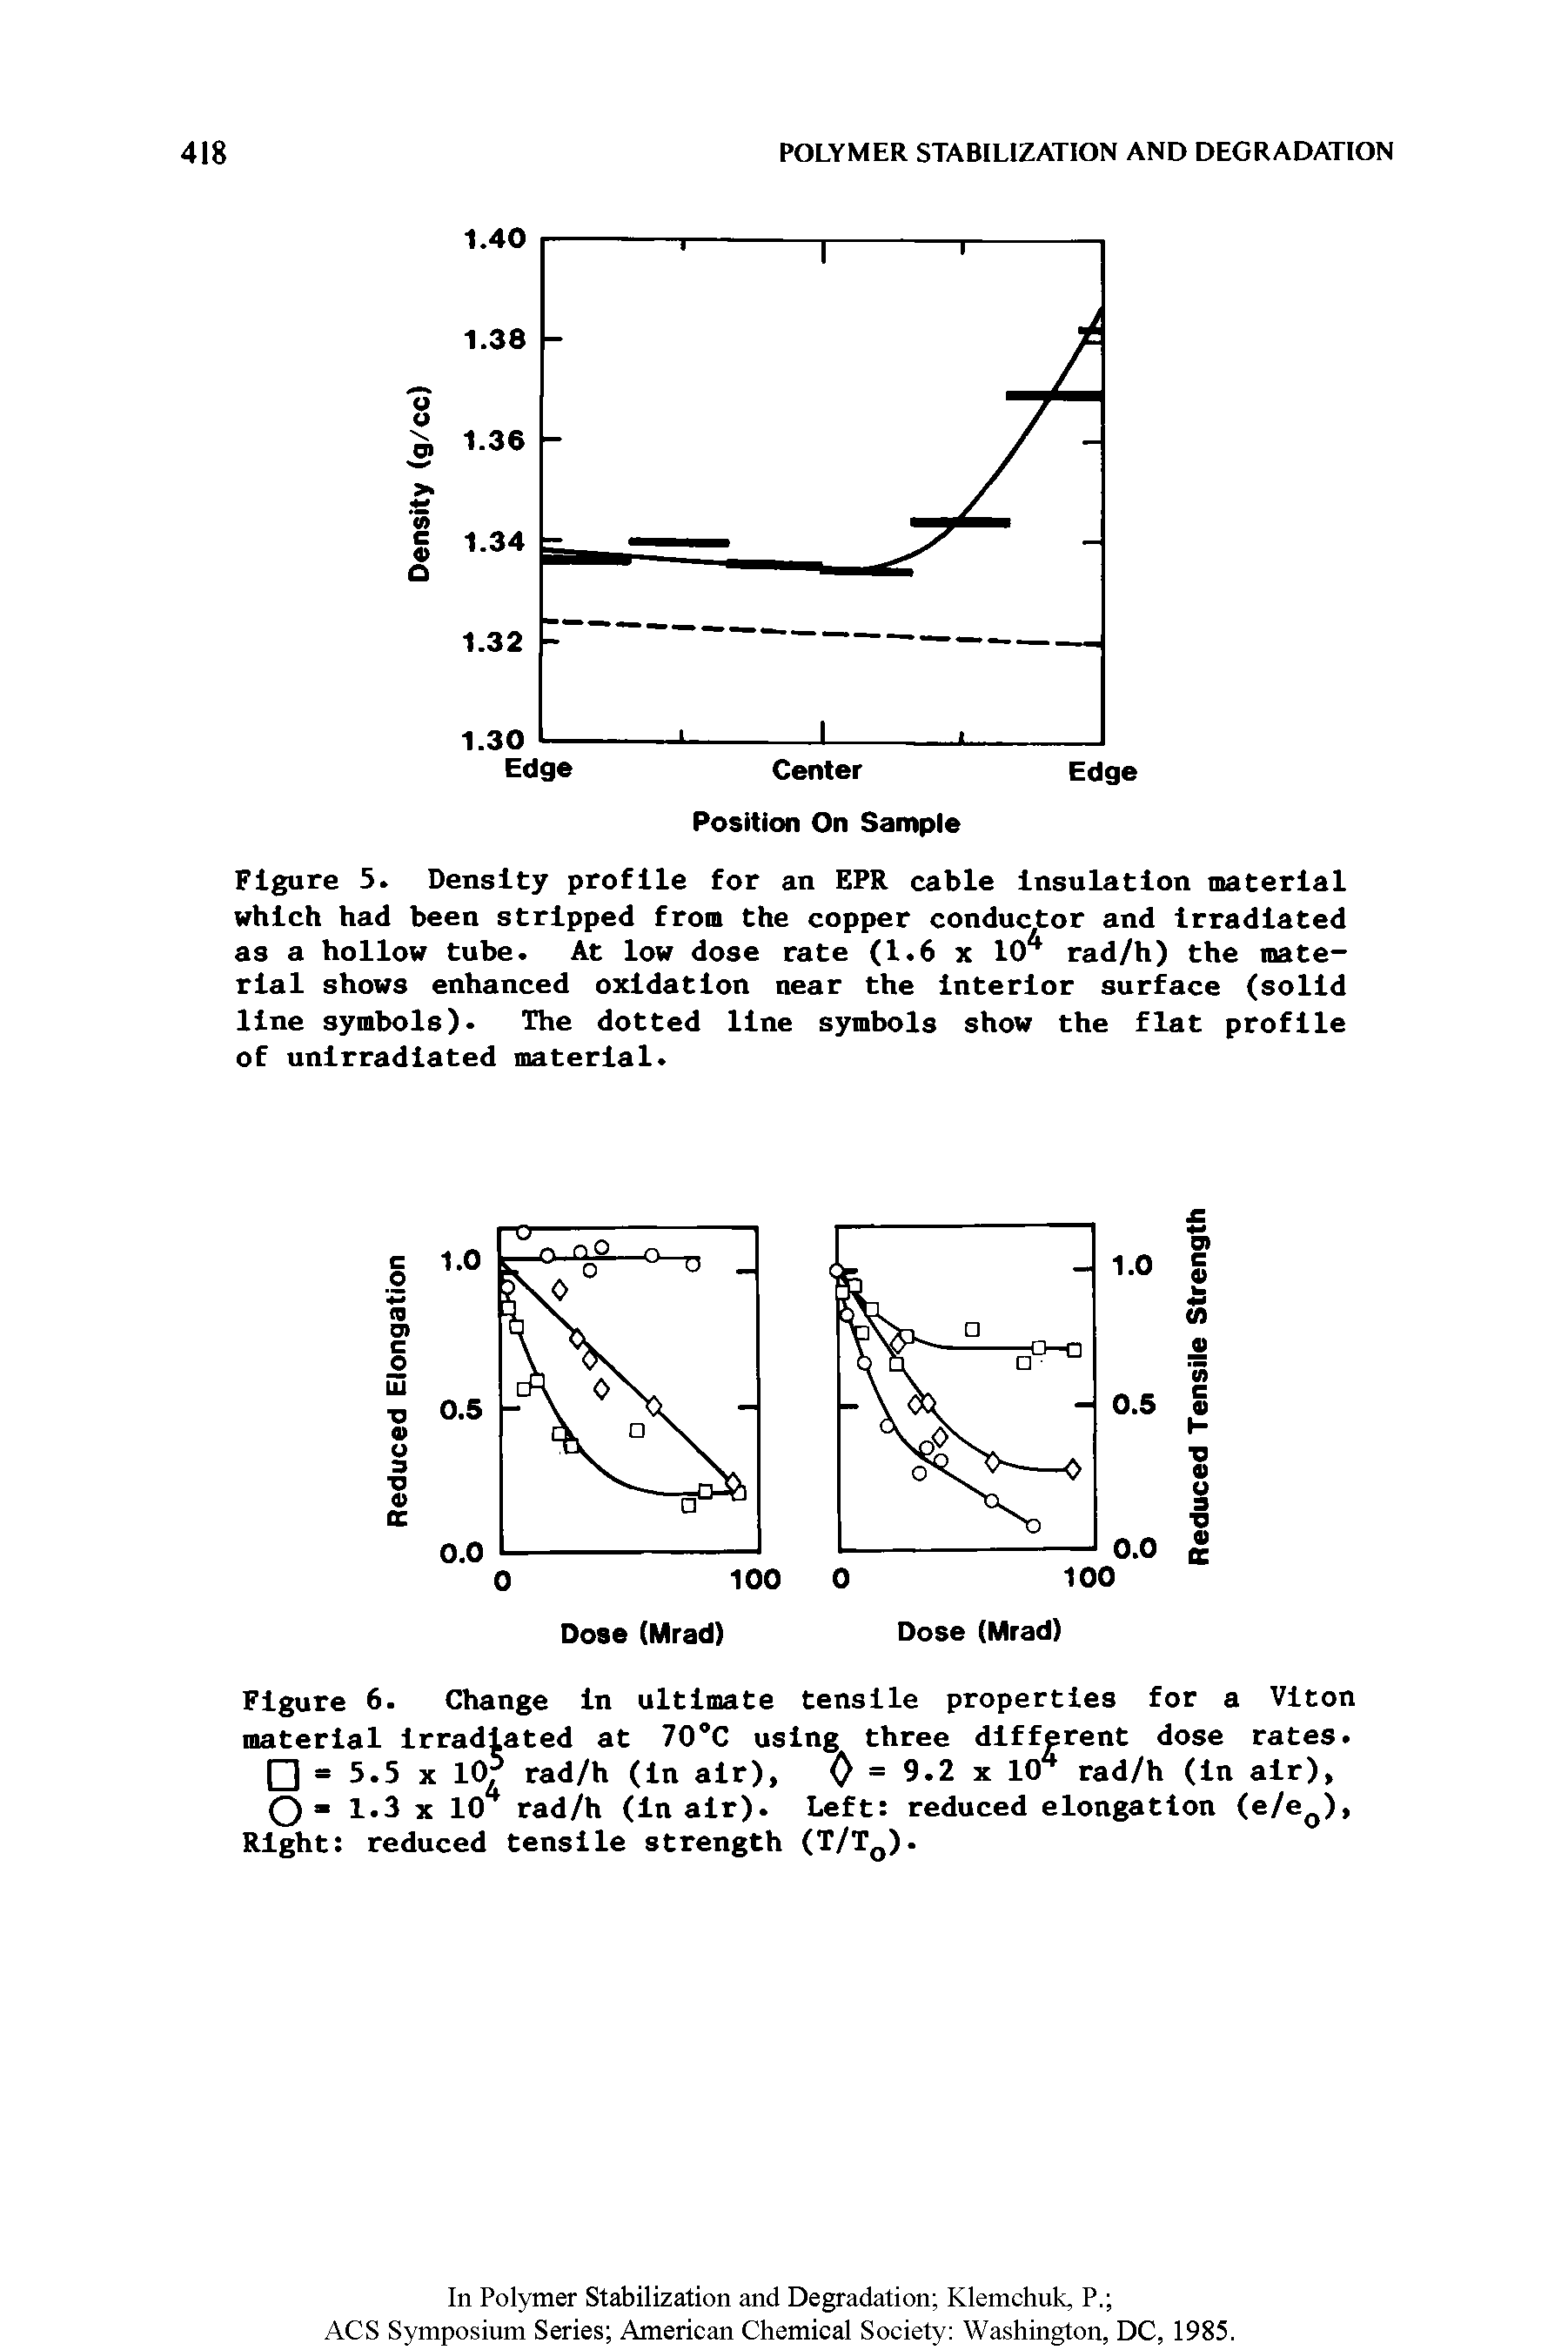 Figure 5. Density profile for an EPR cable Insulation material which had been stripped from the copper conductor and irradiated as a hollow tube. At low dose rate (1.6 x 10 rad/h) the material shows enhanced oxidation near the interior surface (solid line symbols). The dotted line symbols show the flat profile of unirradiated material.